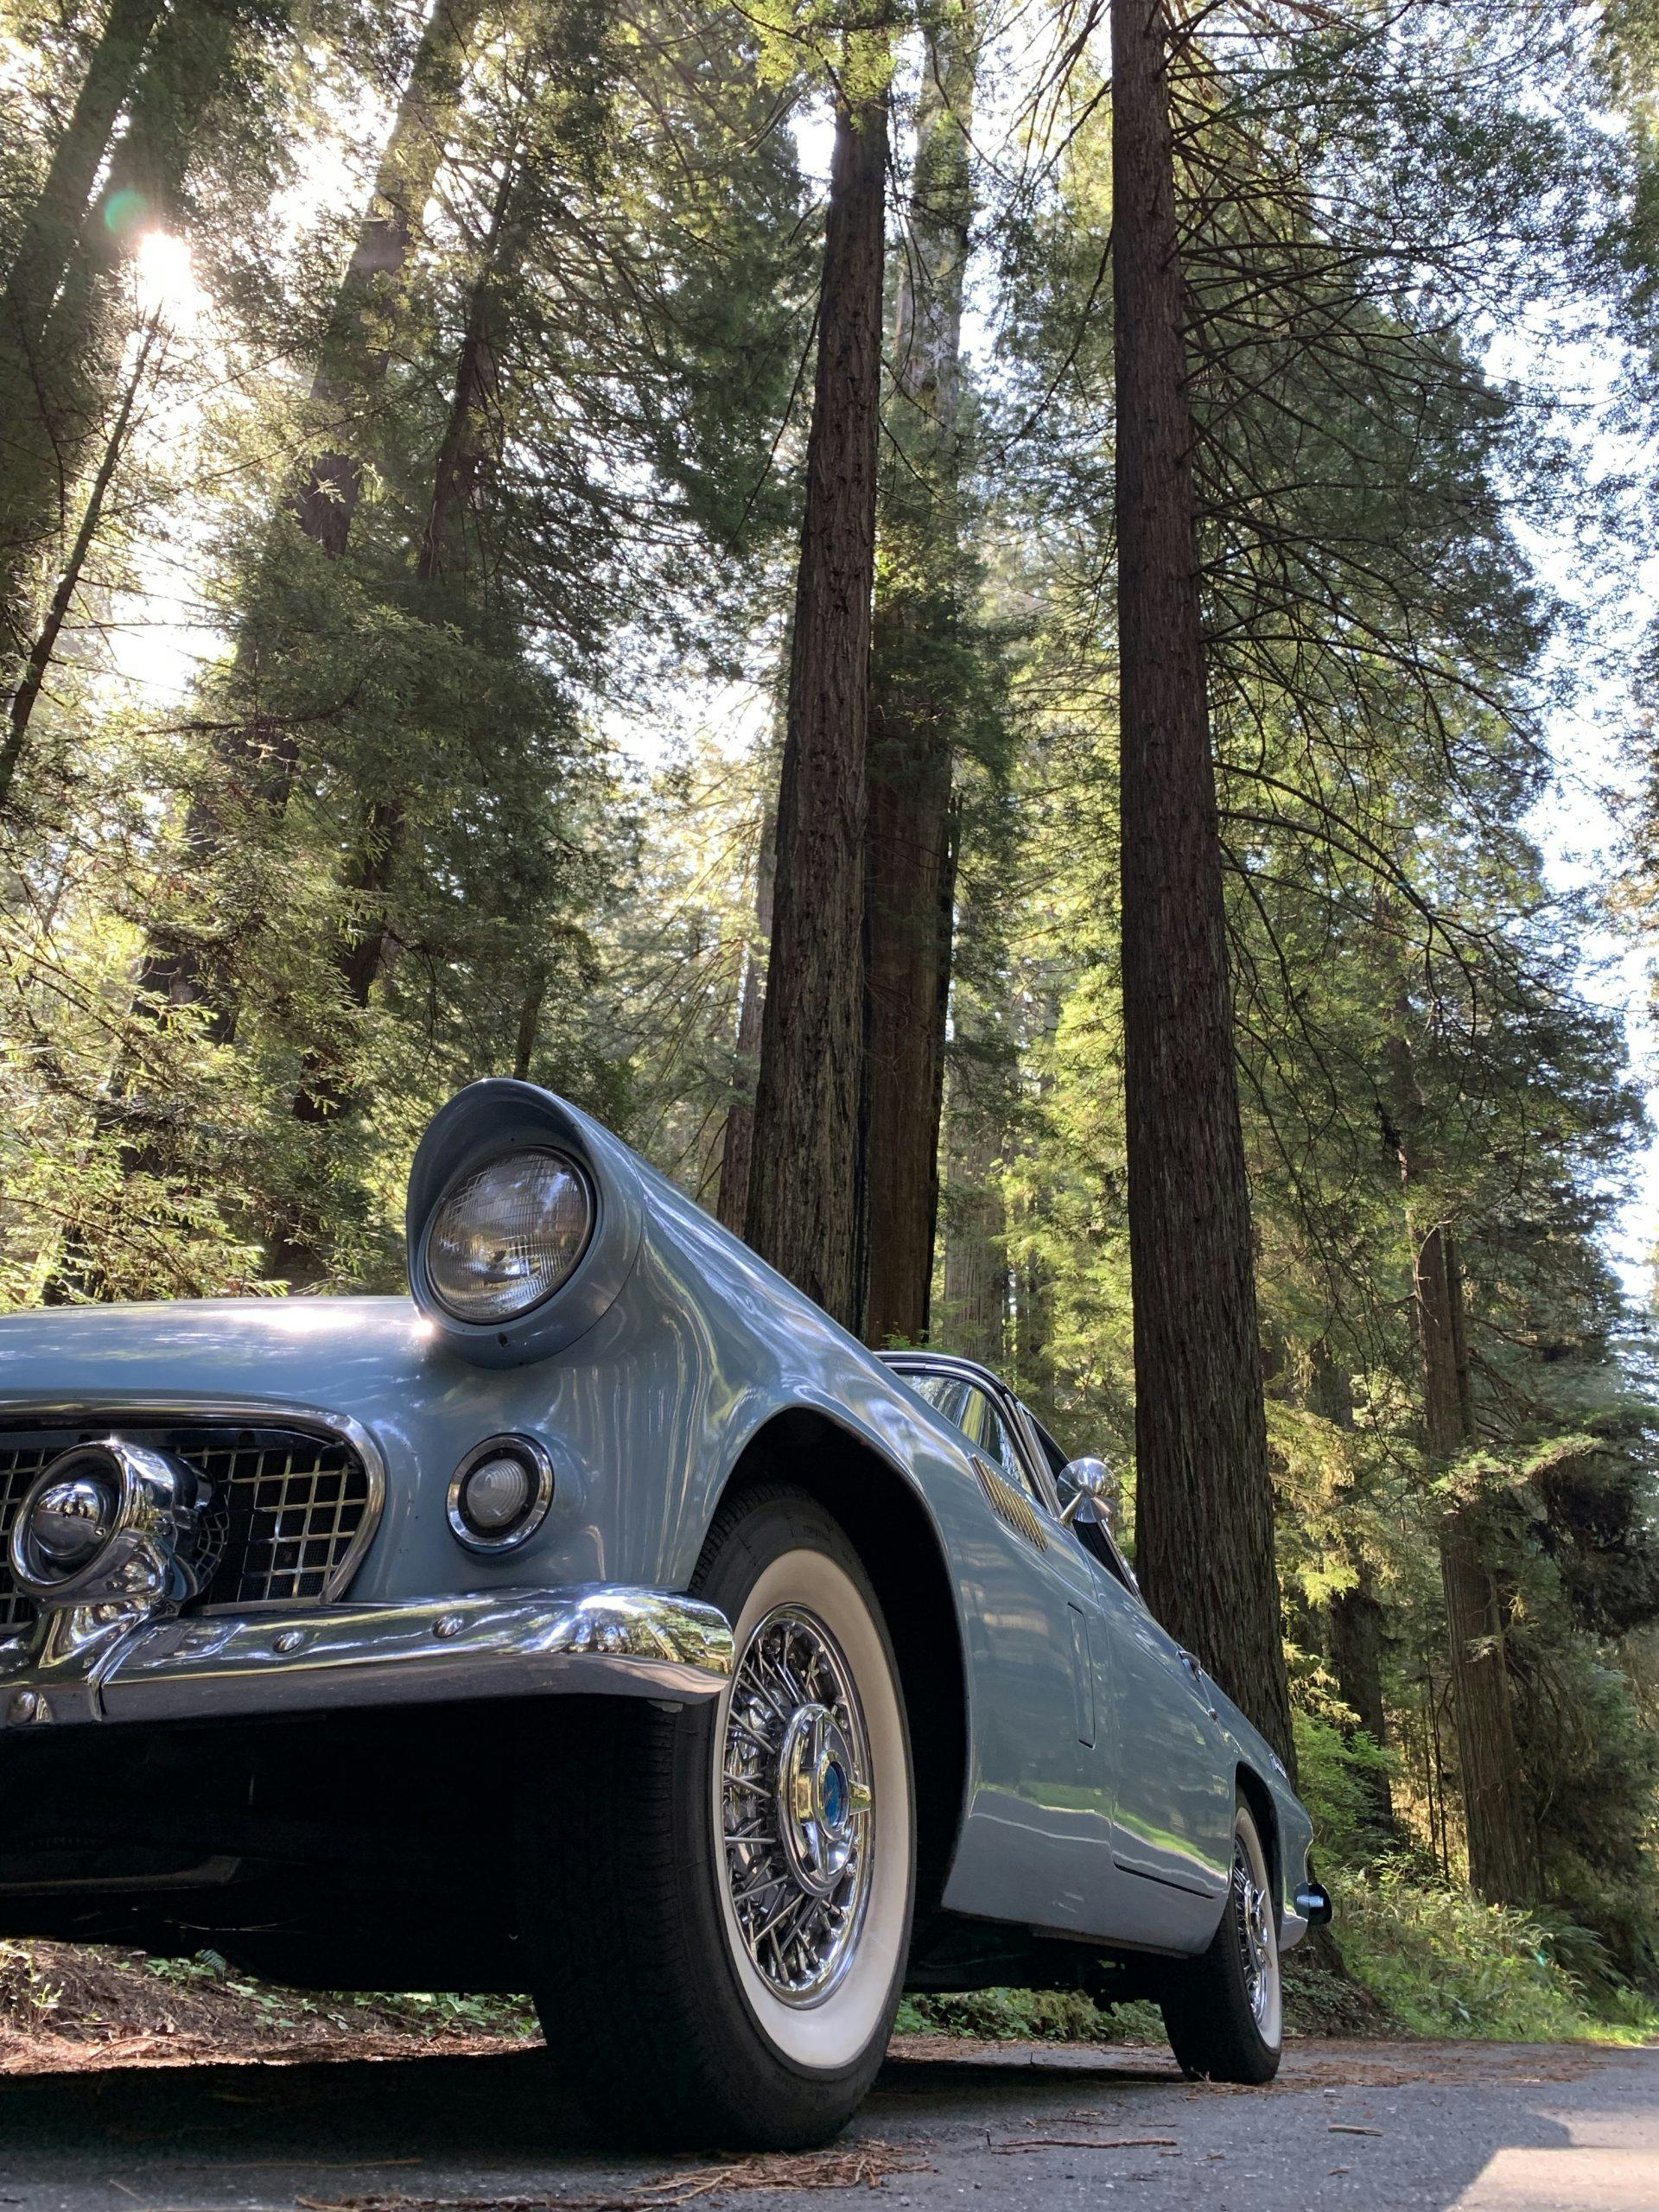 1956 Ford Thunderbird Front Side By Redwood Trees